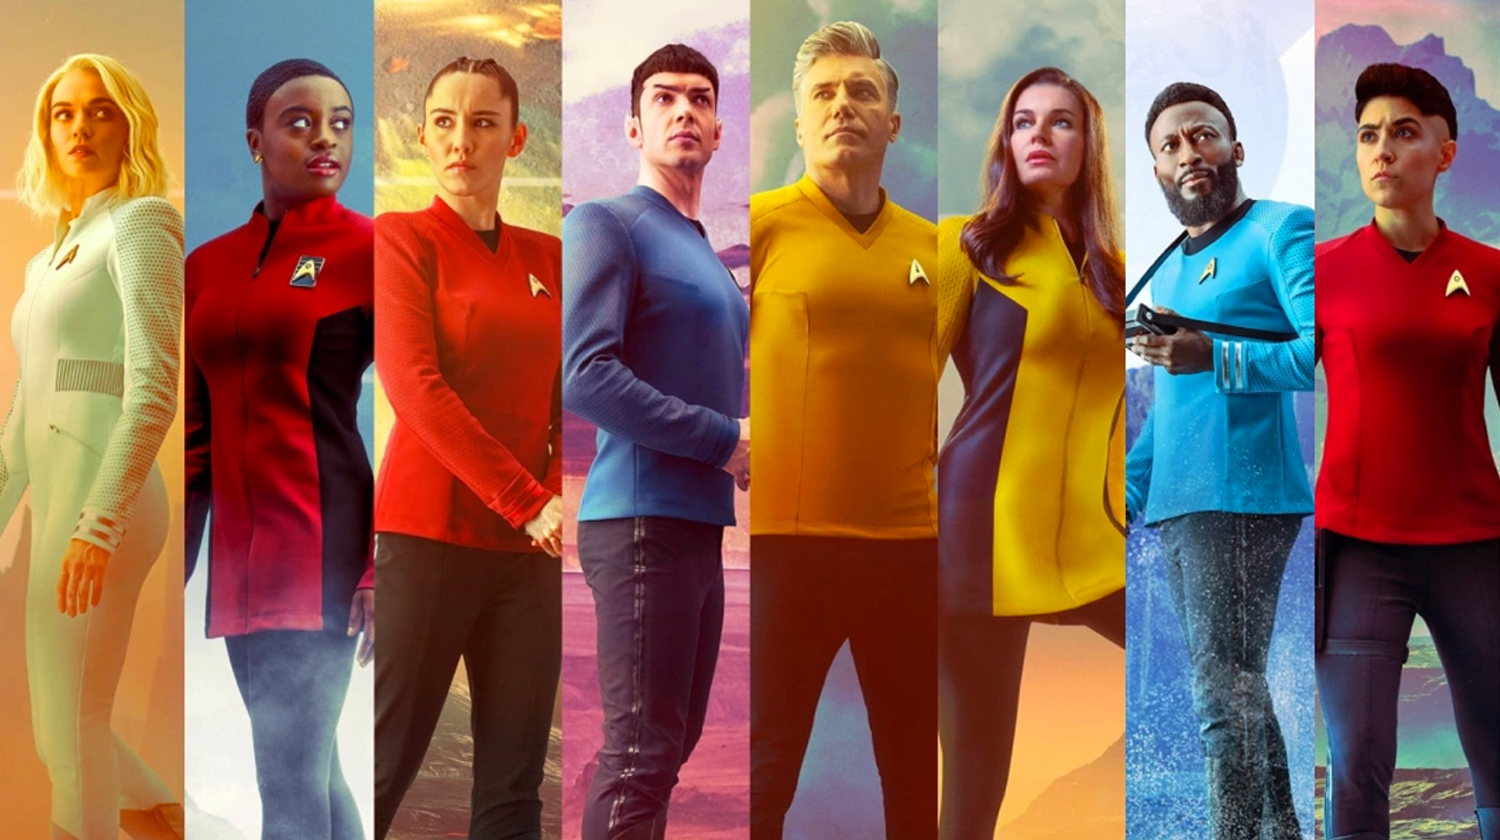 array of star trek characters in different colored shirts